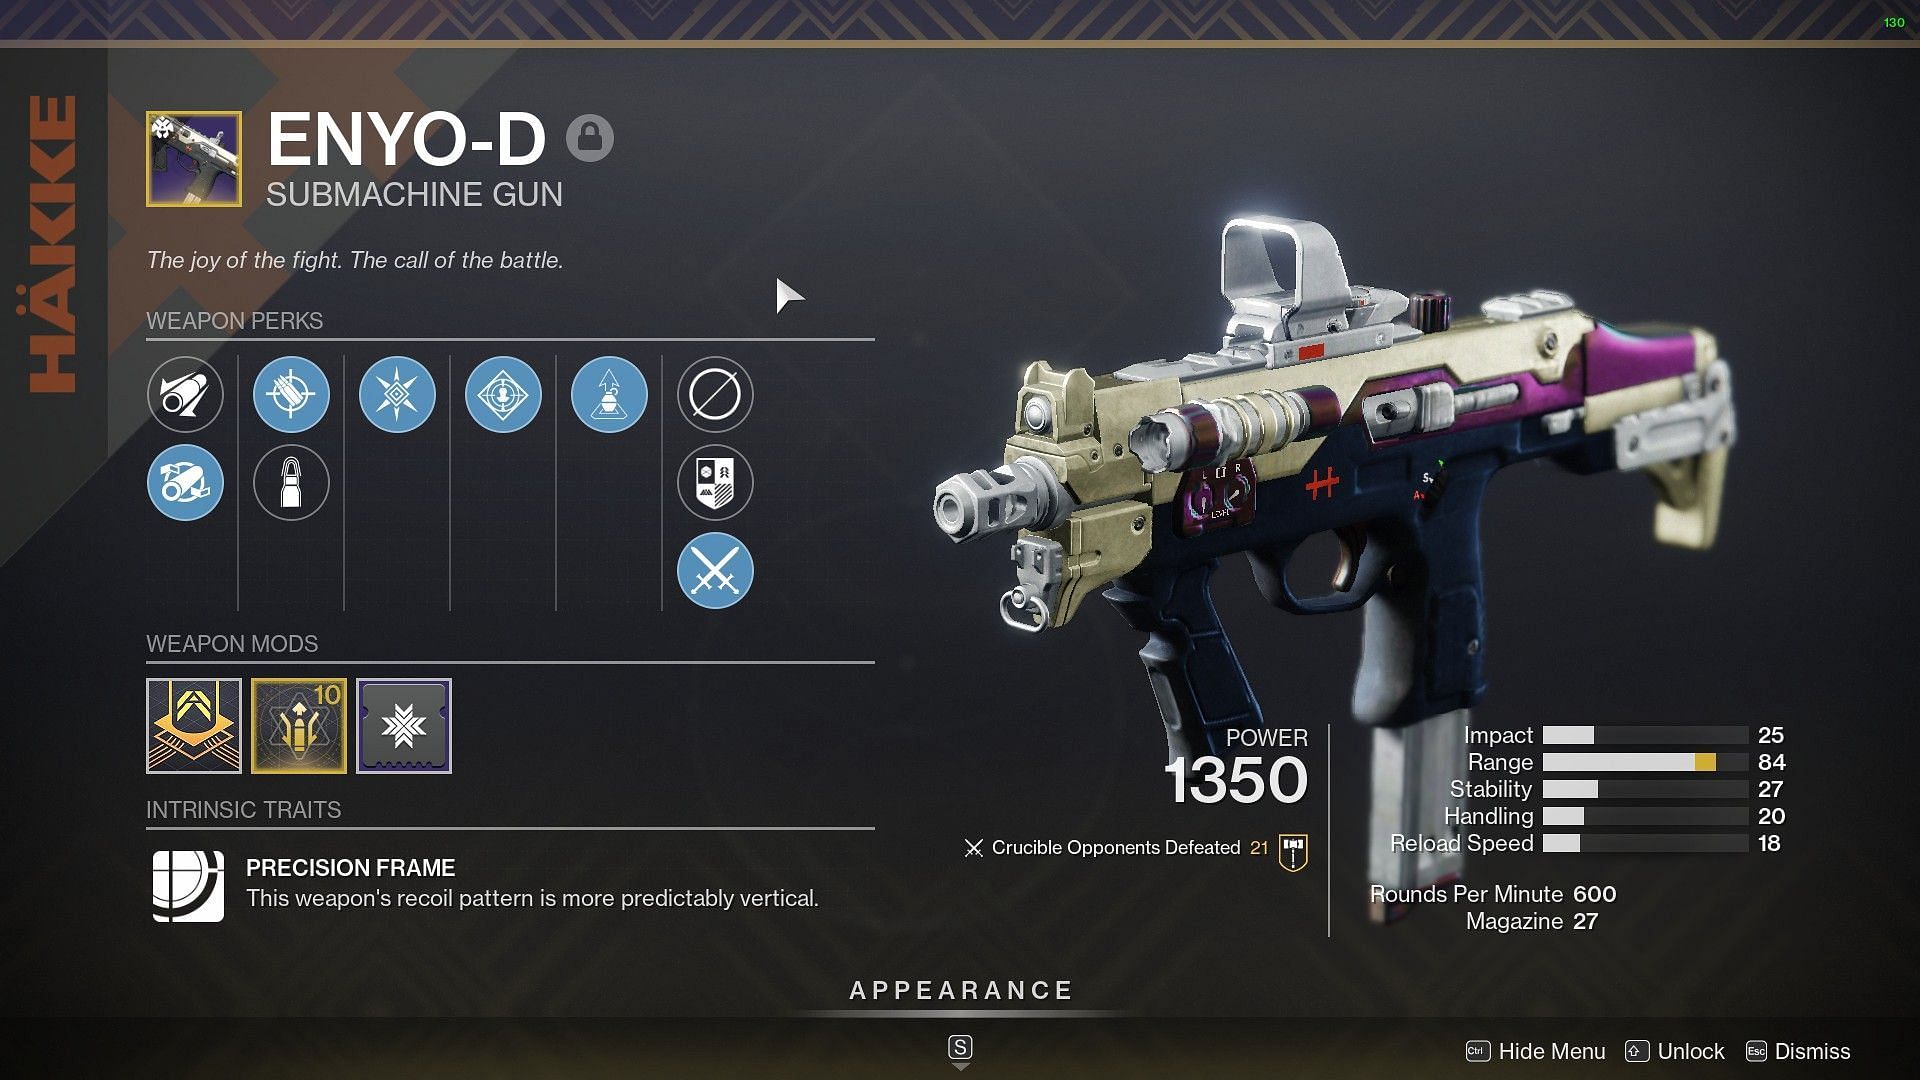 Enyo-D SMG in Destiny 2 from Banshee-44 (Image via Bungie)